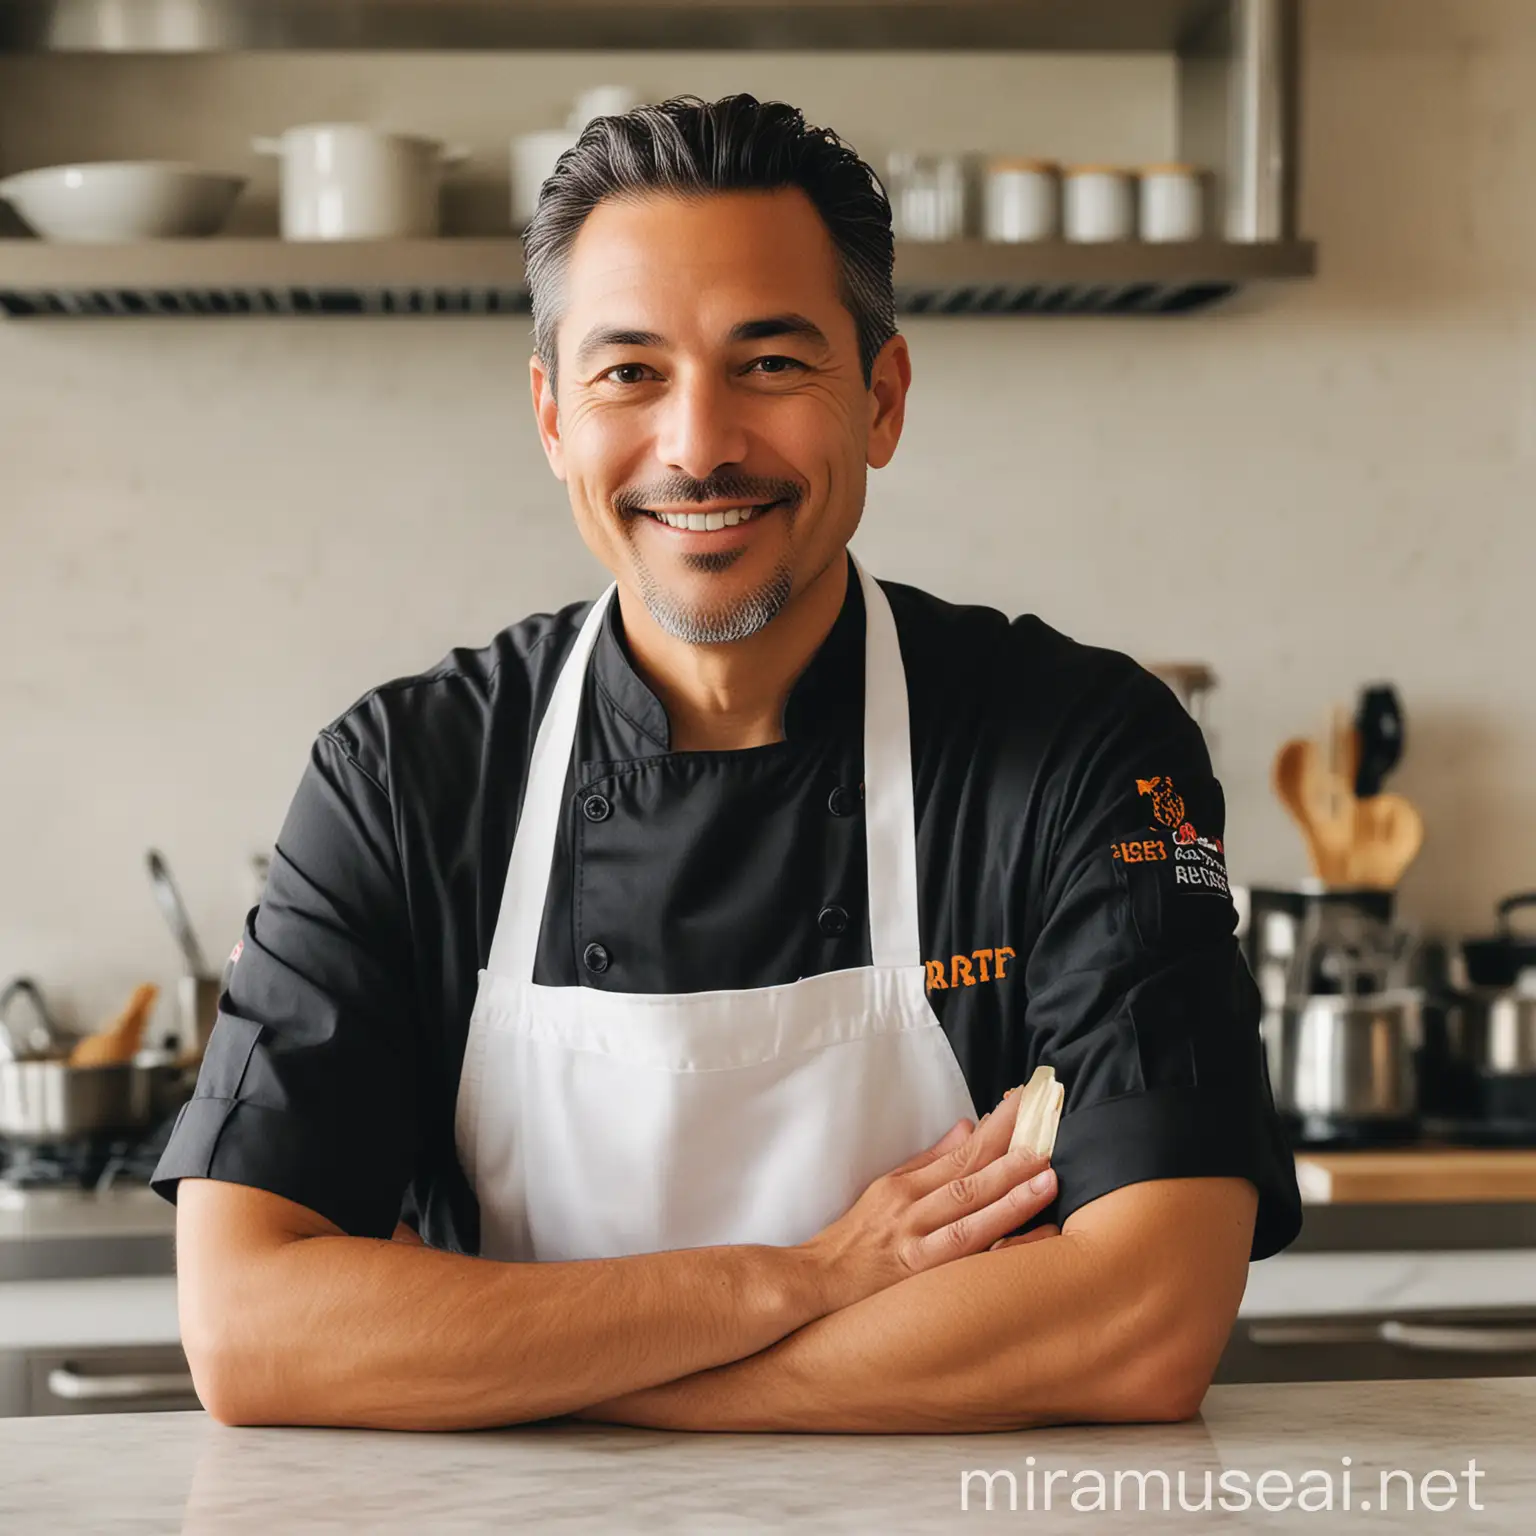 renowned bay area chef
